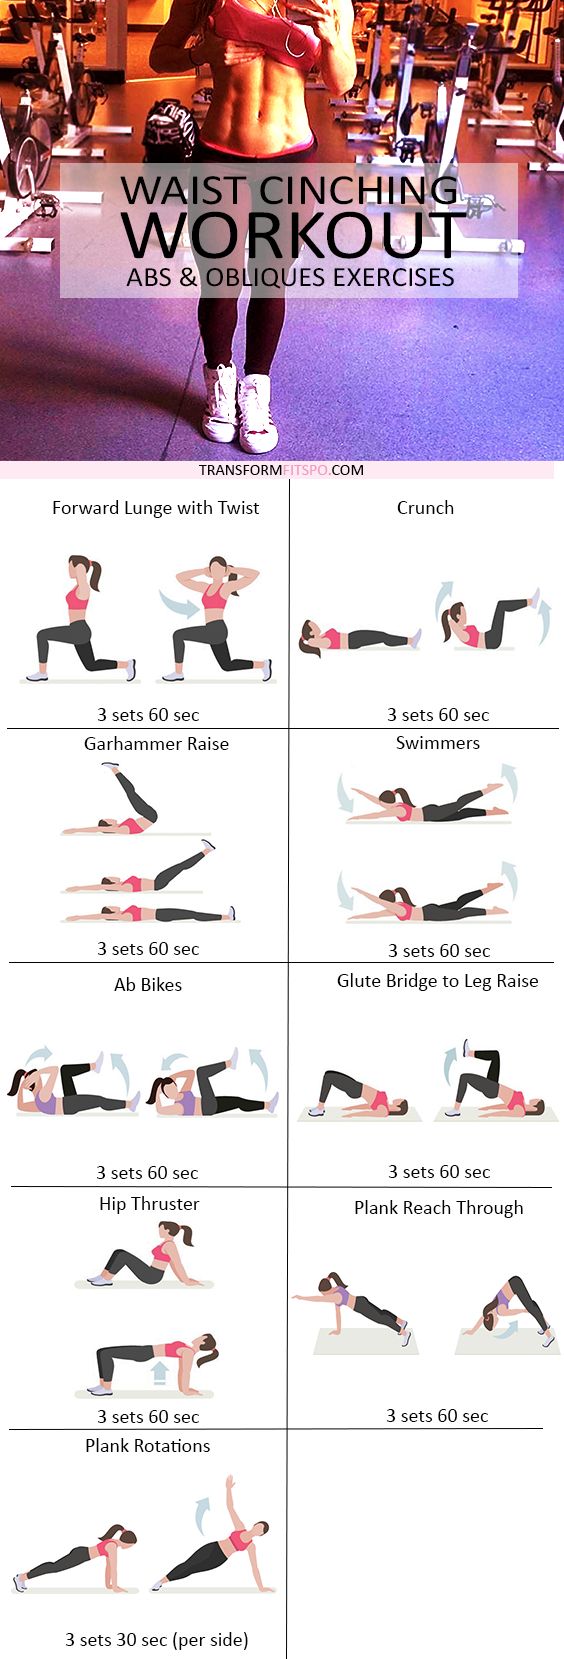 14 Incredible Ab Workouts That Will Flatten Your Stomach In 2018